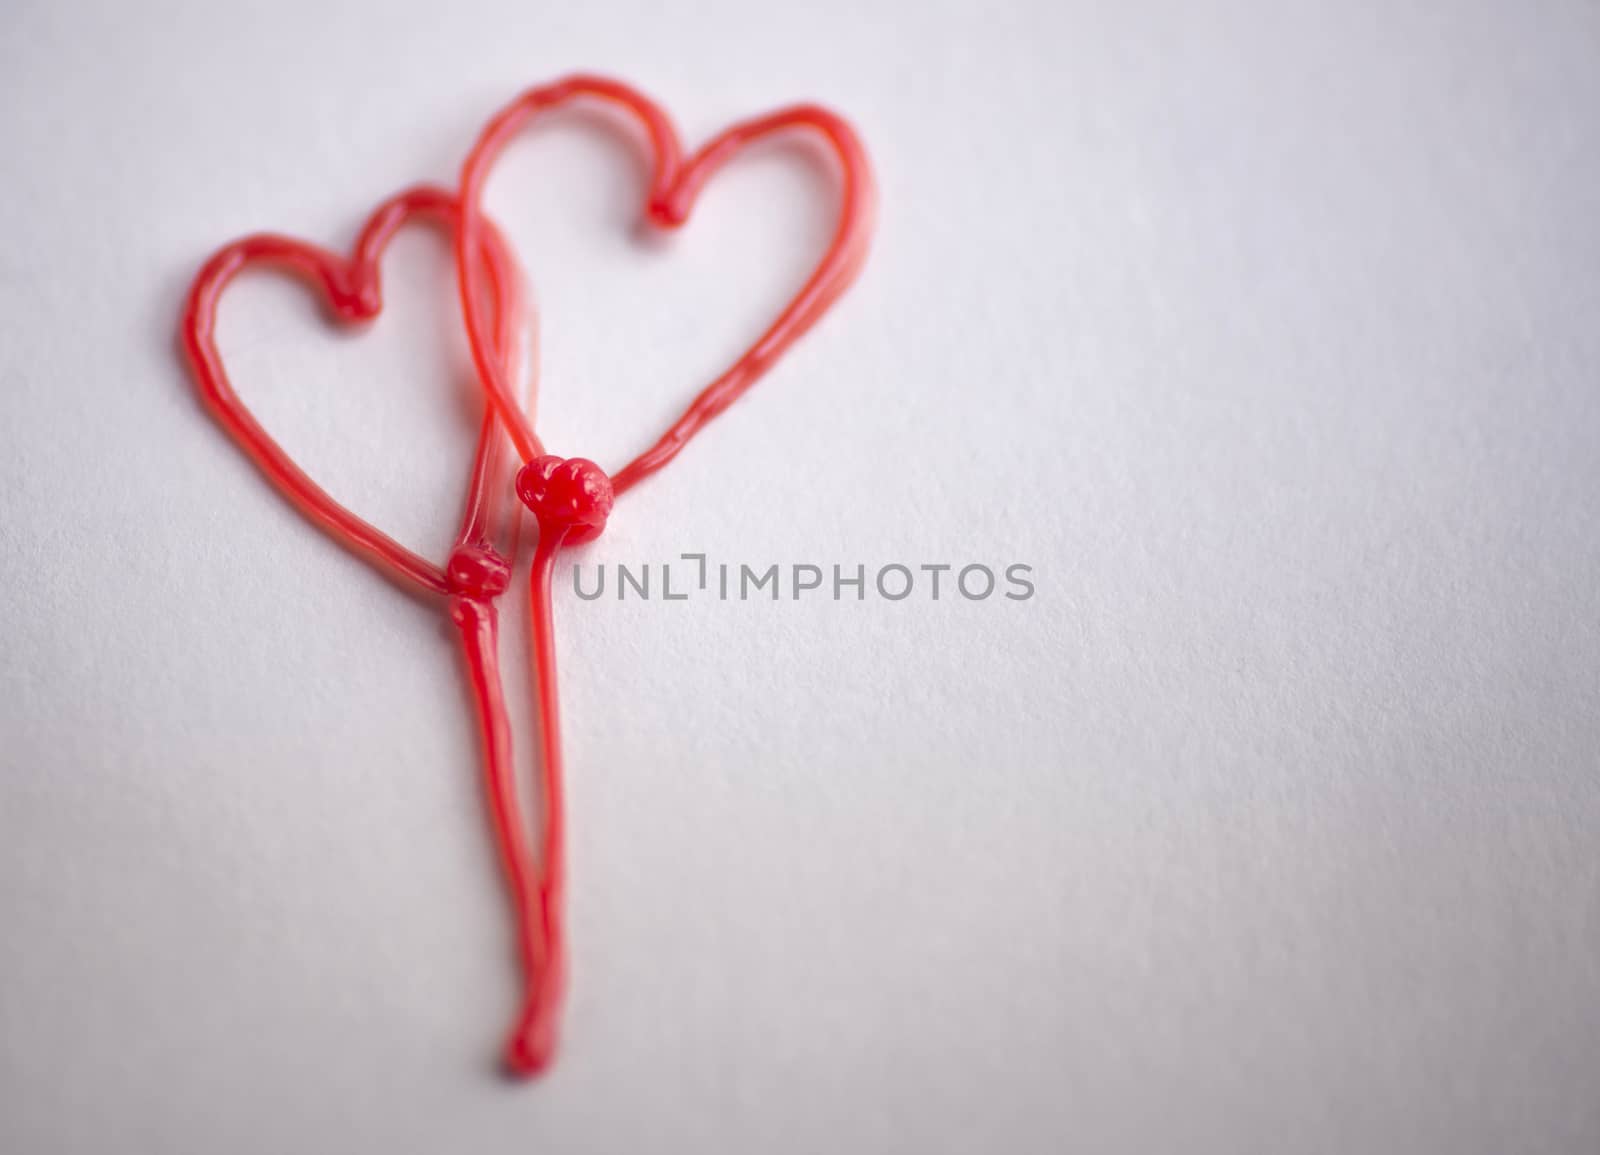 red heart drawn by 3d pen on white background